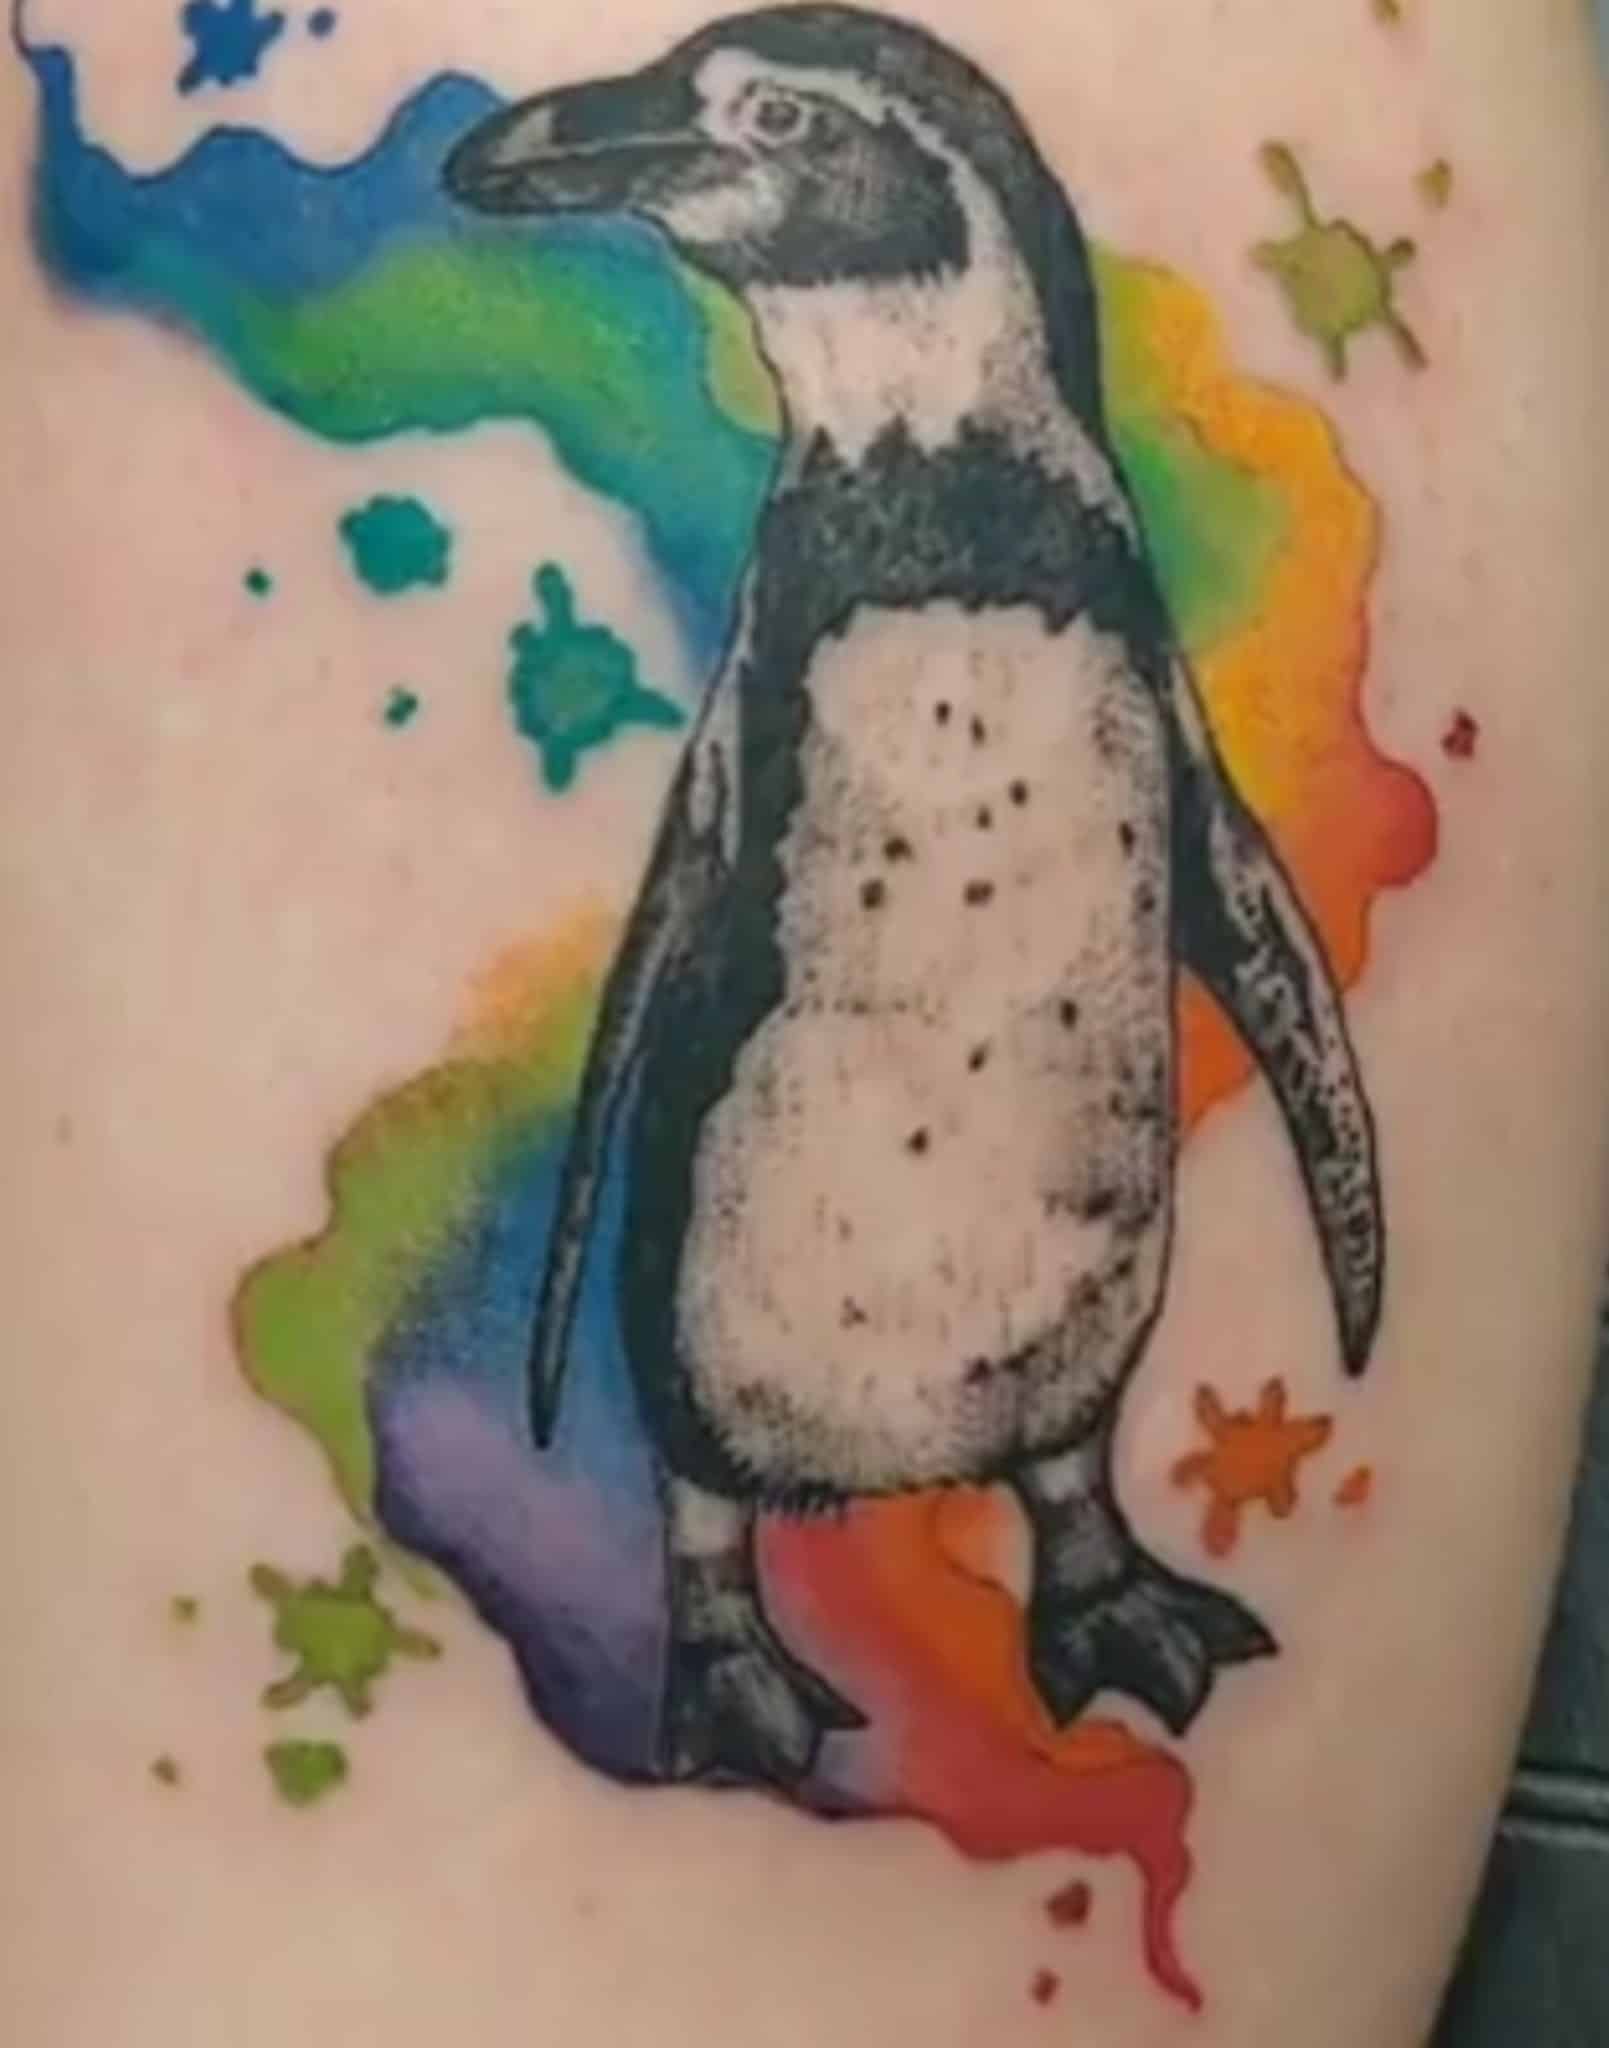 emily-page-tattoo-artist-penguin-with-watercolor